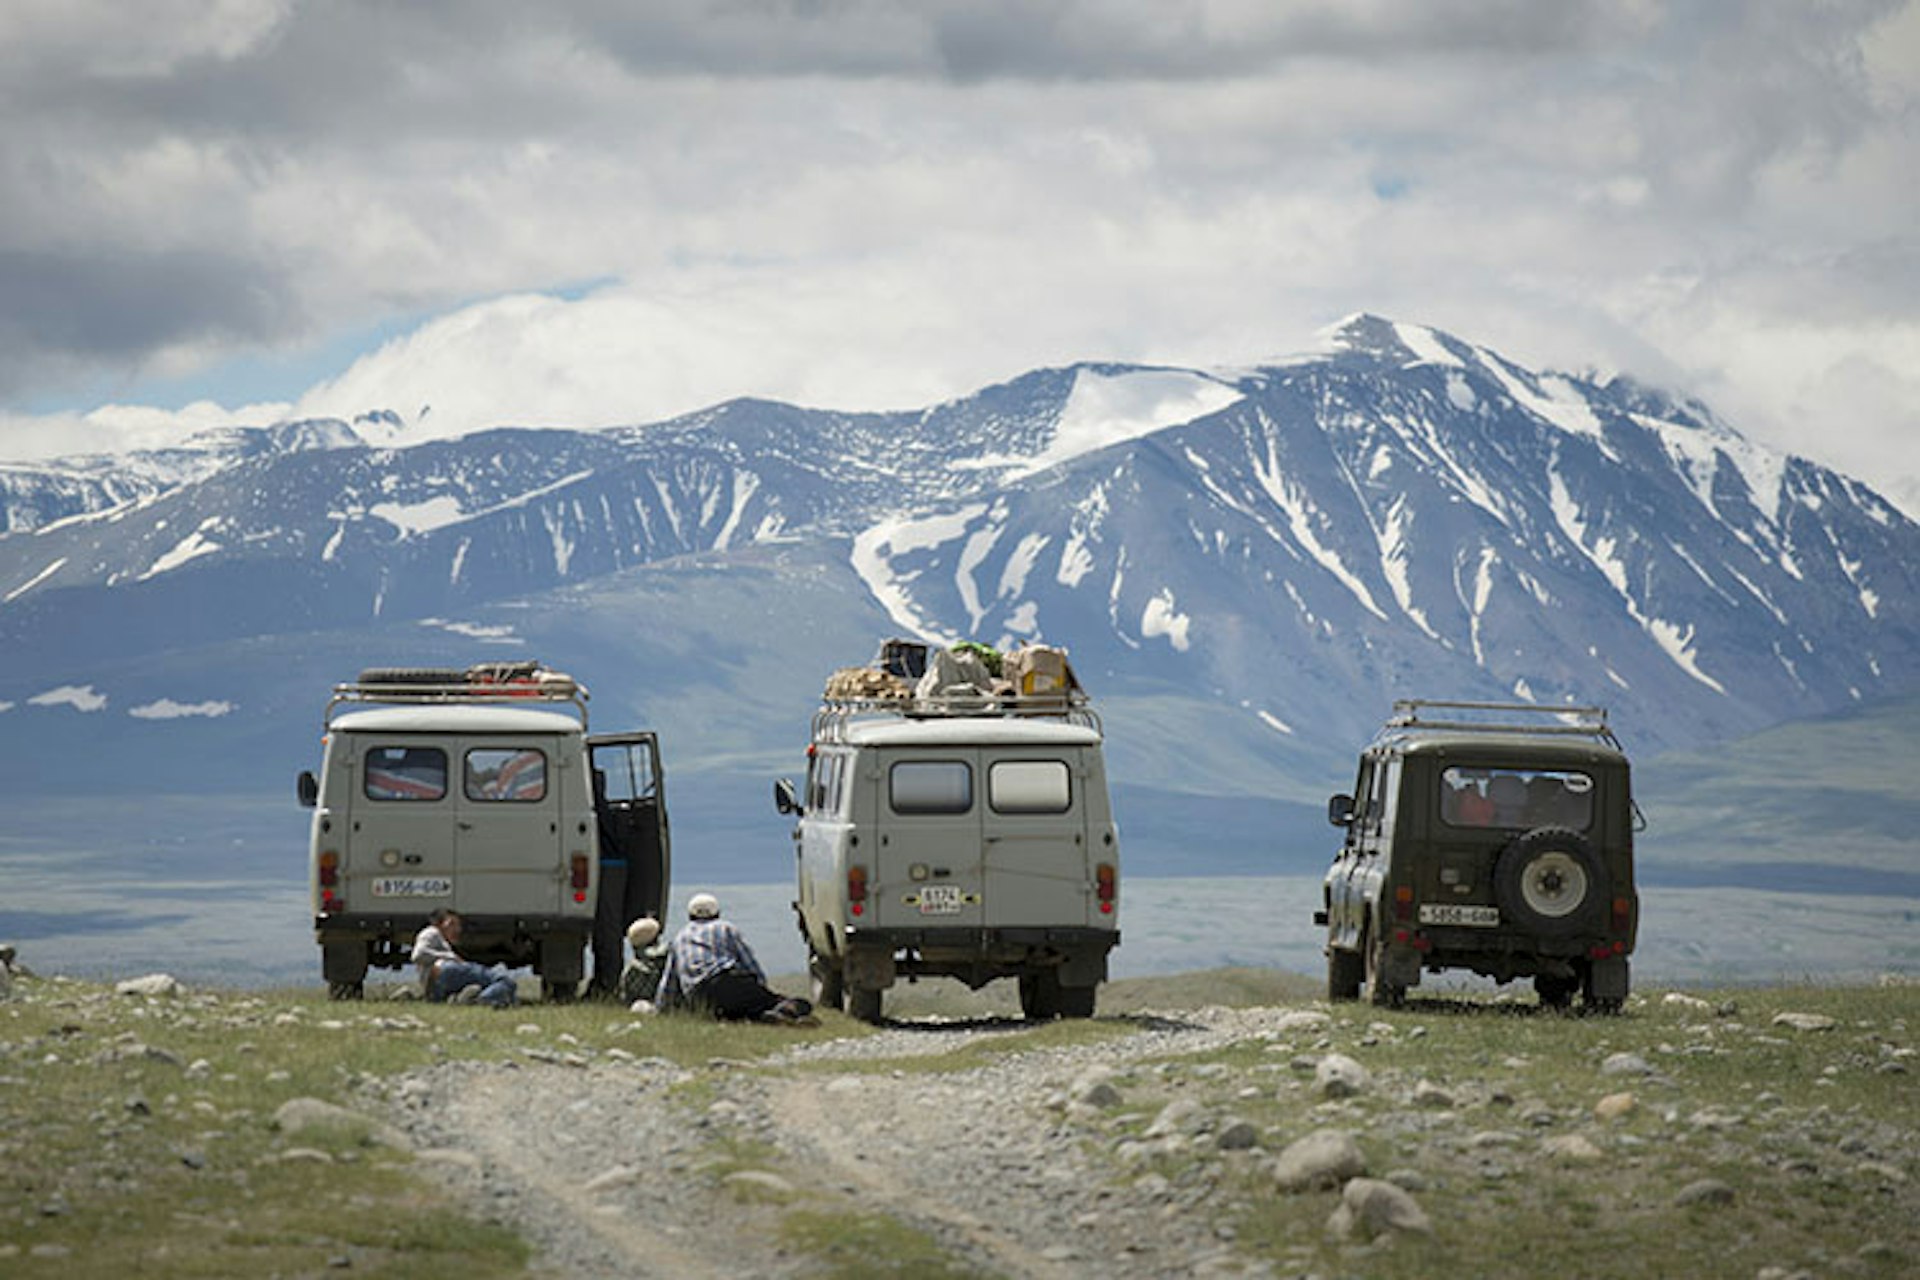 Ex-Russian military 4x4s traverse the rough Altai terrain. Image by David Baxendale / Lonely Planet